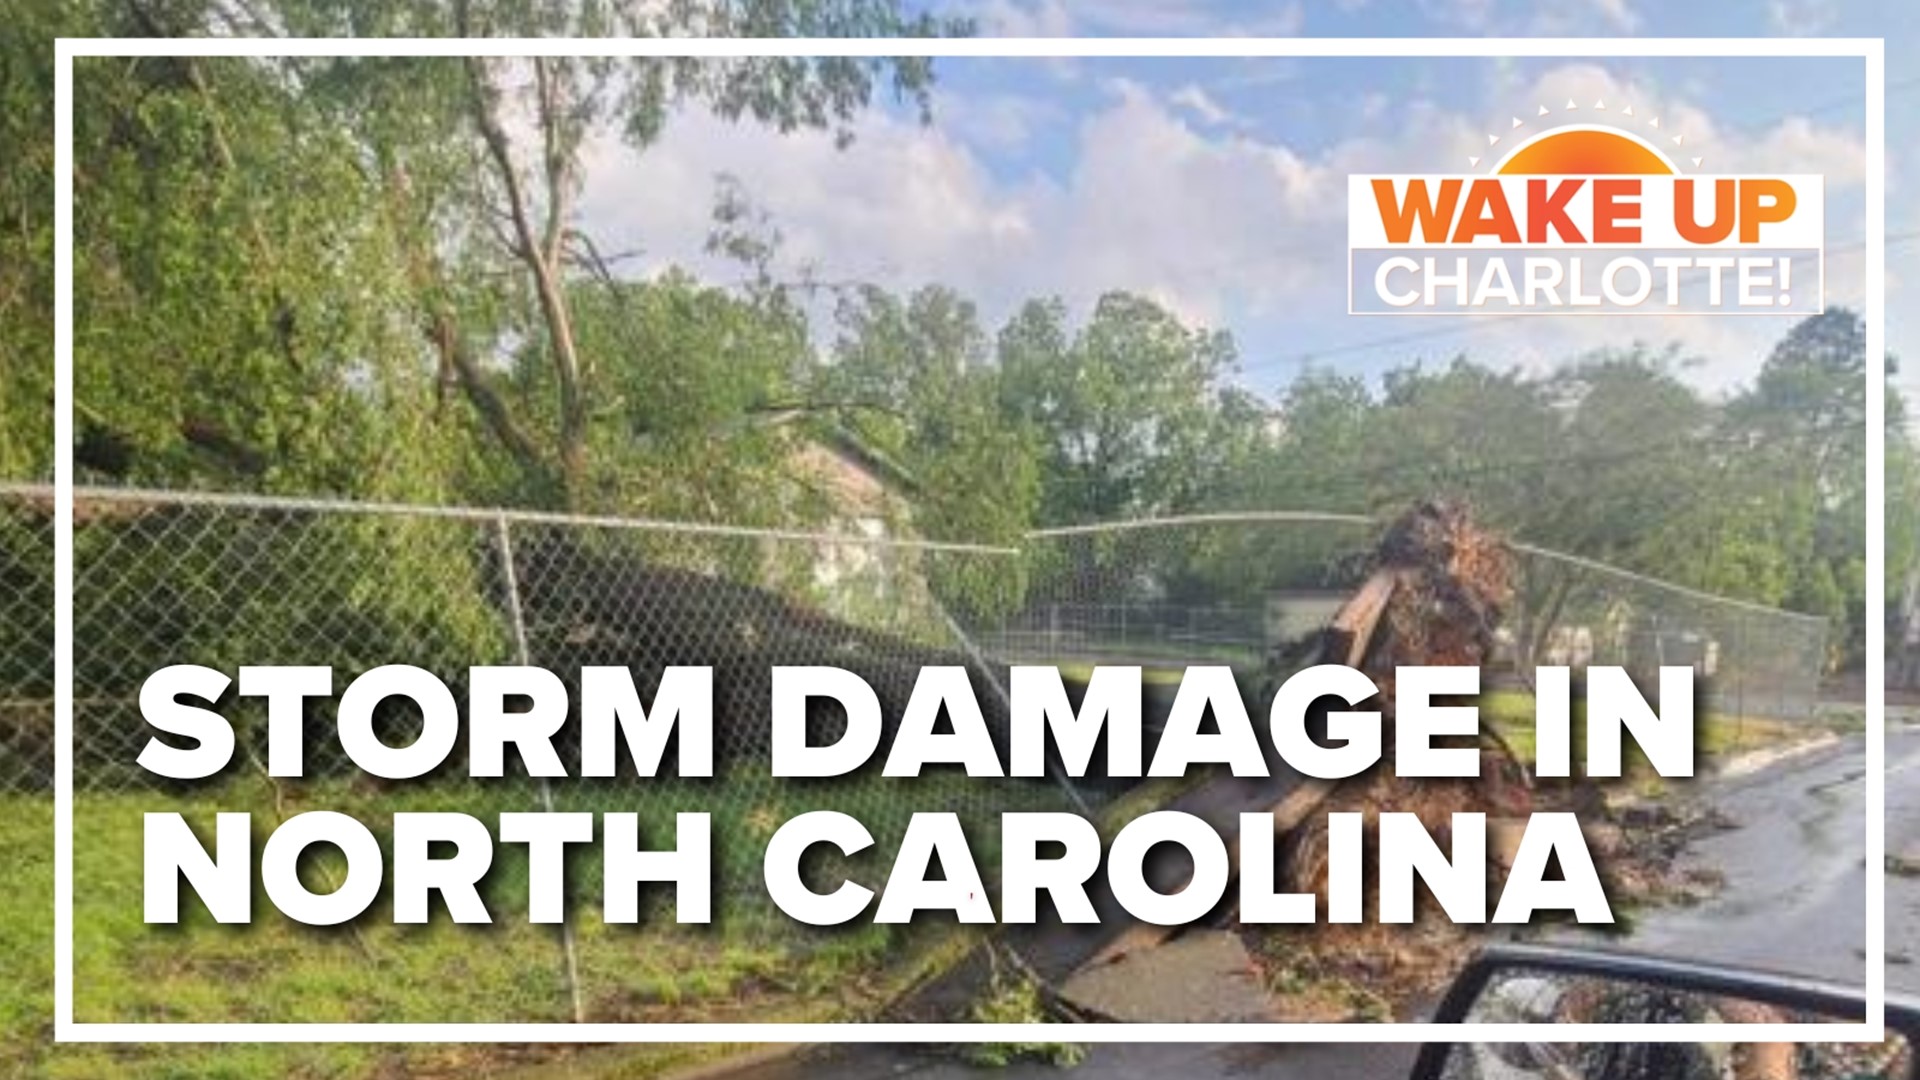 Strong thunderstorms throughout the Carolinas capable of damaging wind, hail, and isolated tornadoes are keeping us weather aware.